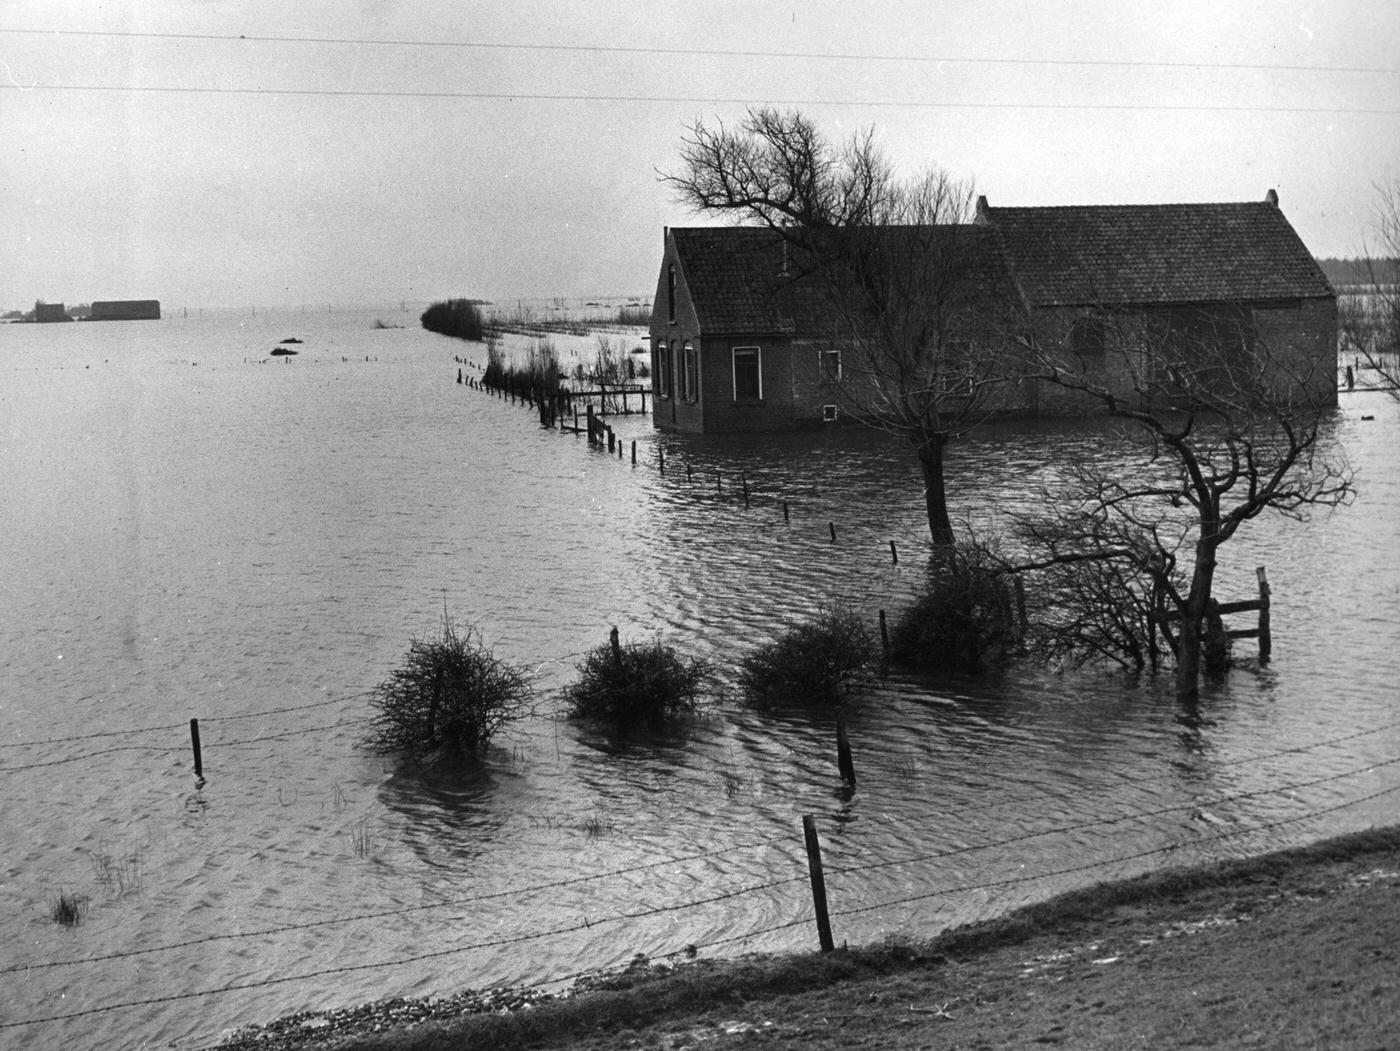 A Dutch farmhouse flooded by water, Netherlands, February 1953.